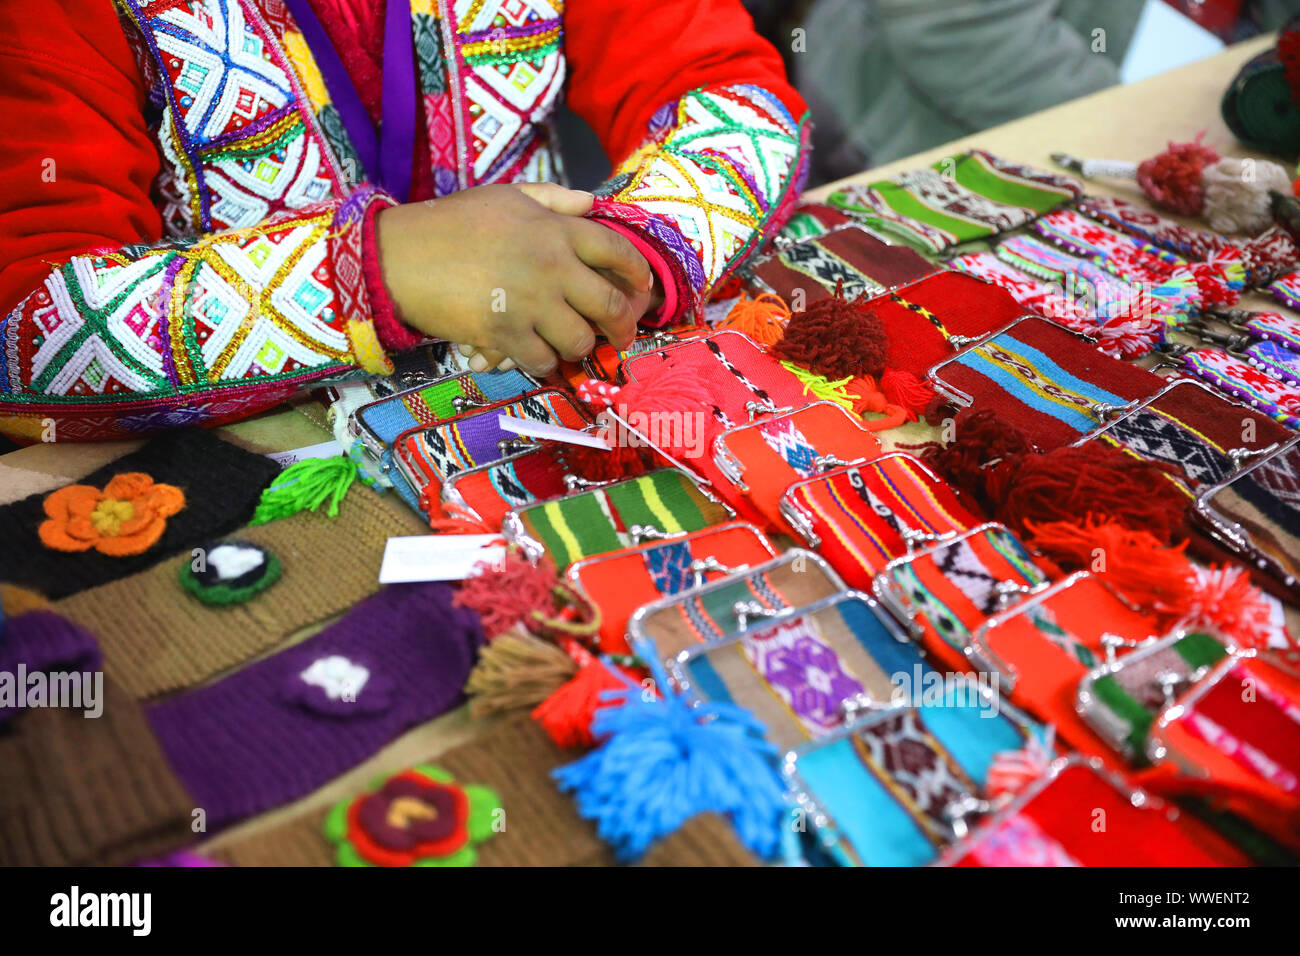 LIMA, PERU, June 23, 2019, The hands of Andean traditional woman with typical red dress sells handcraft at a market in Miraflores Stock Photo